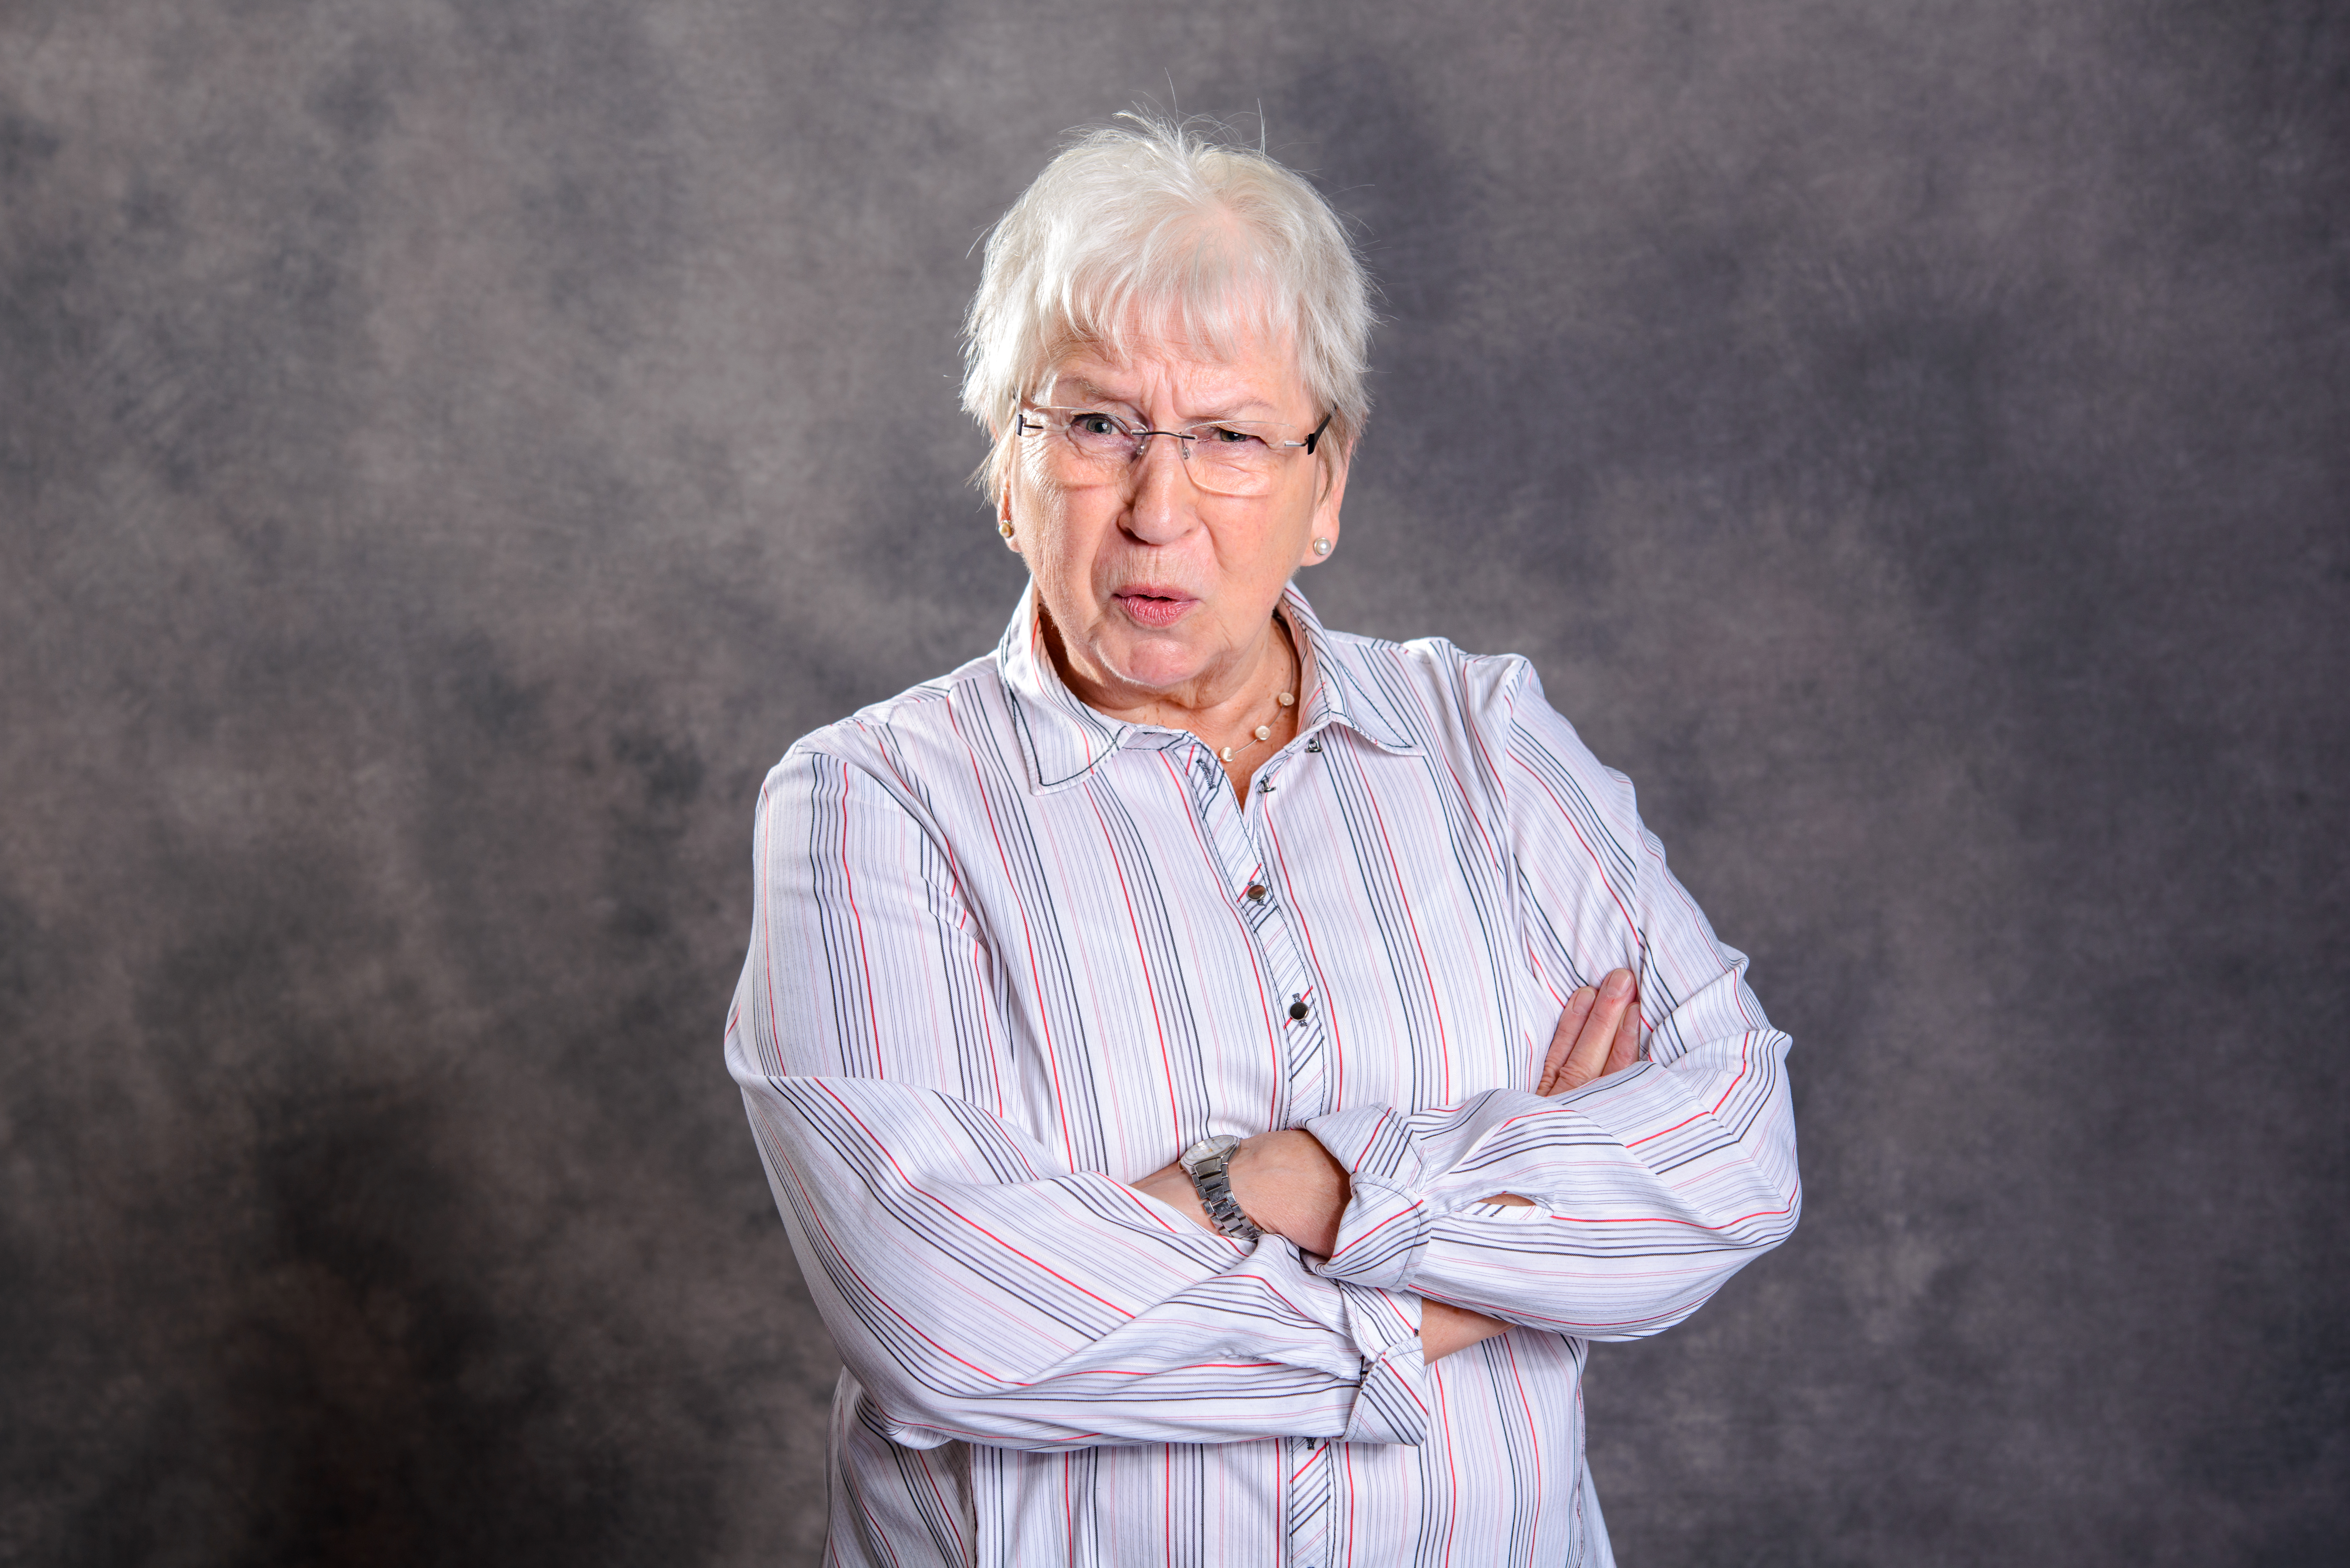 An upset older woman with her arms folded against her chest | Source: Shutterstock